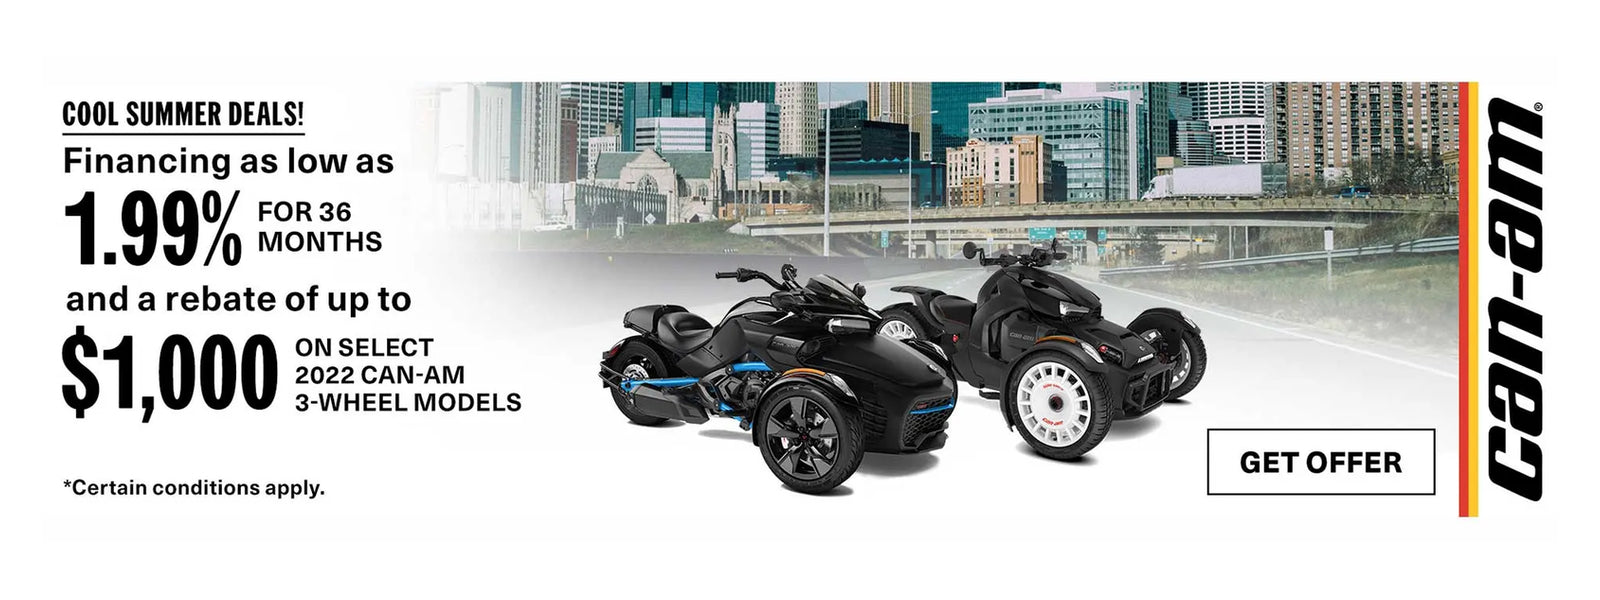 New/Used Can-Am Spyder Motorcycles for Sale - Kissimmee - Central